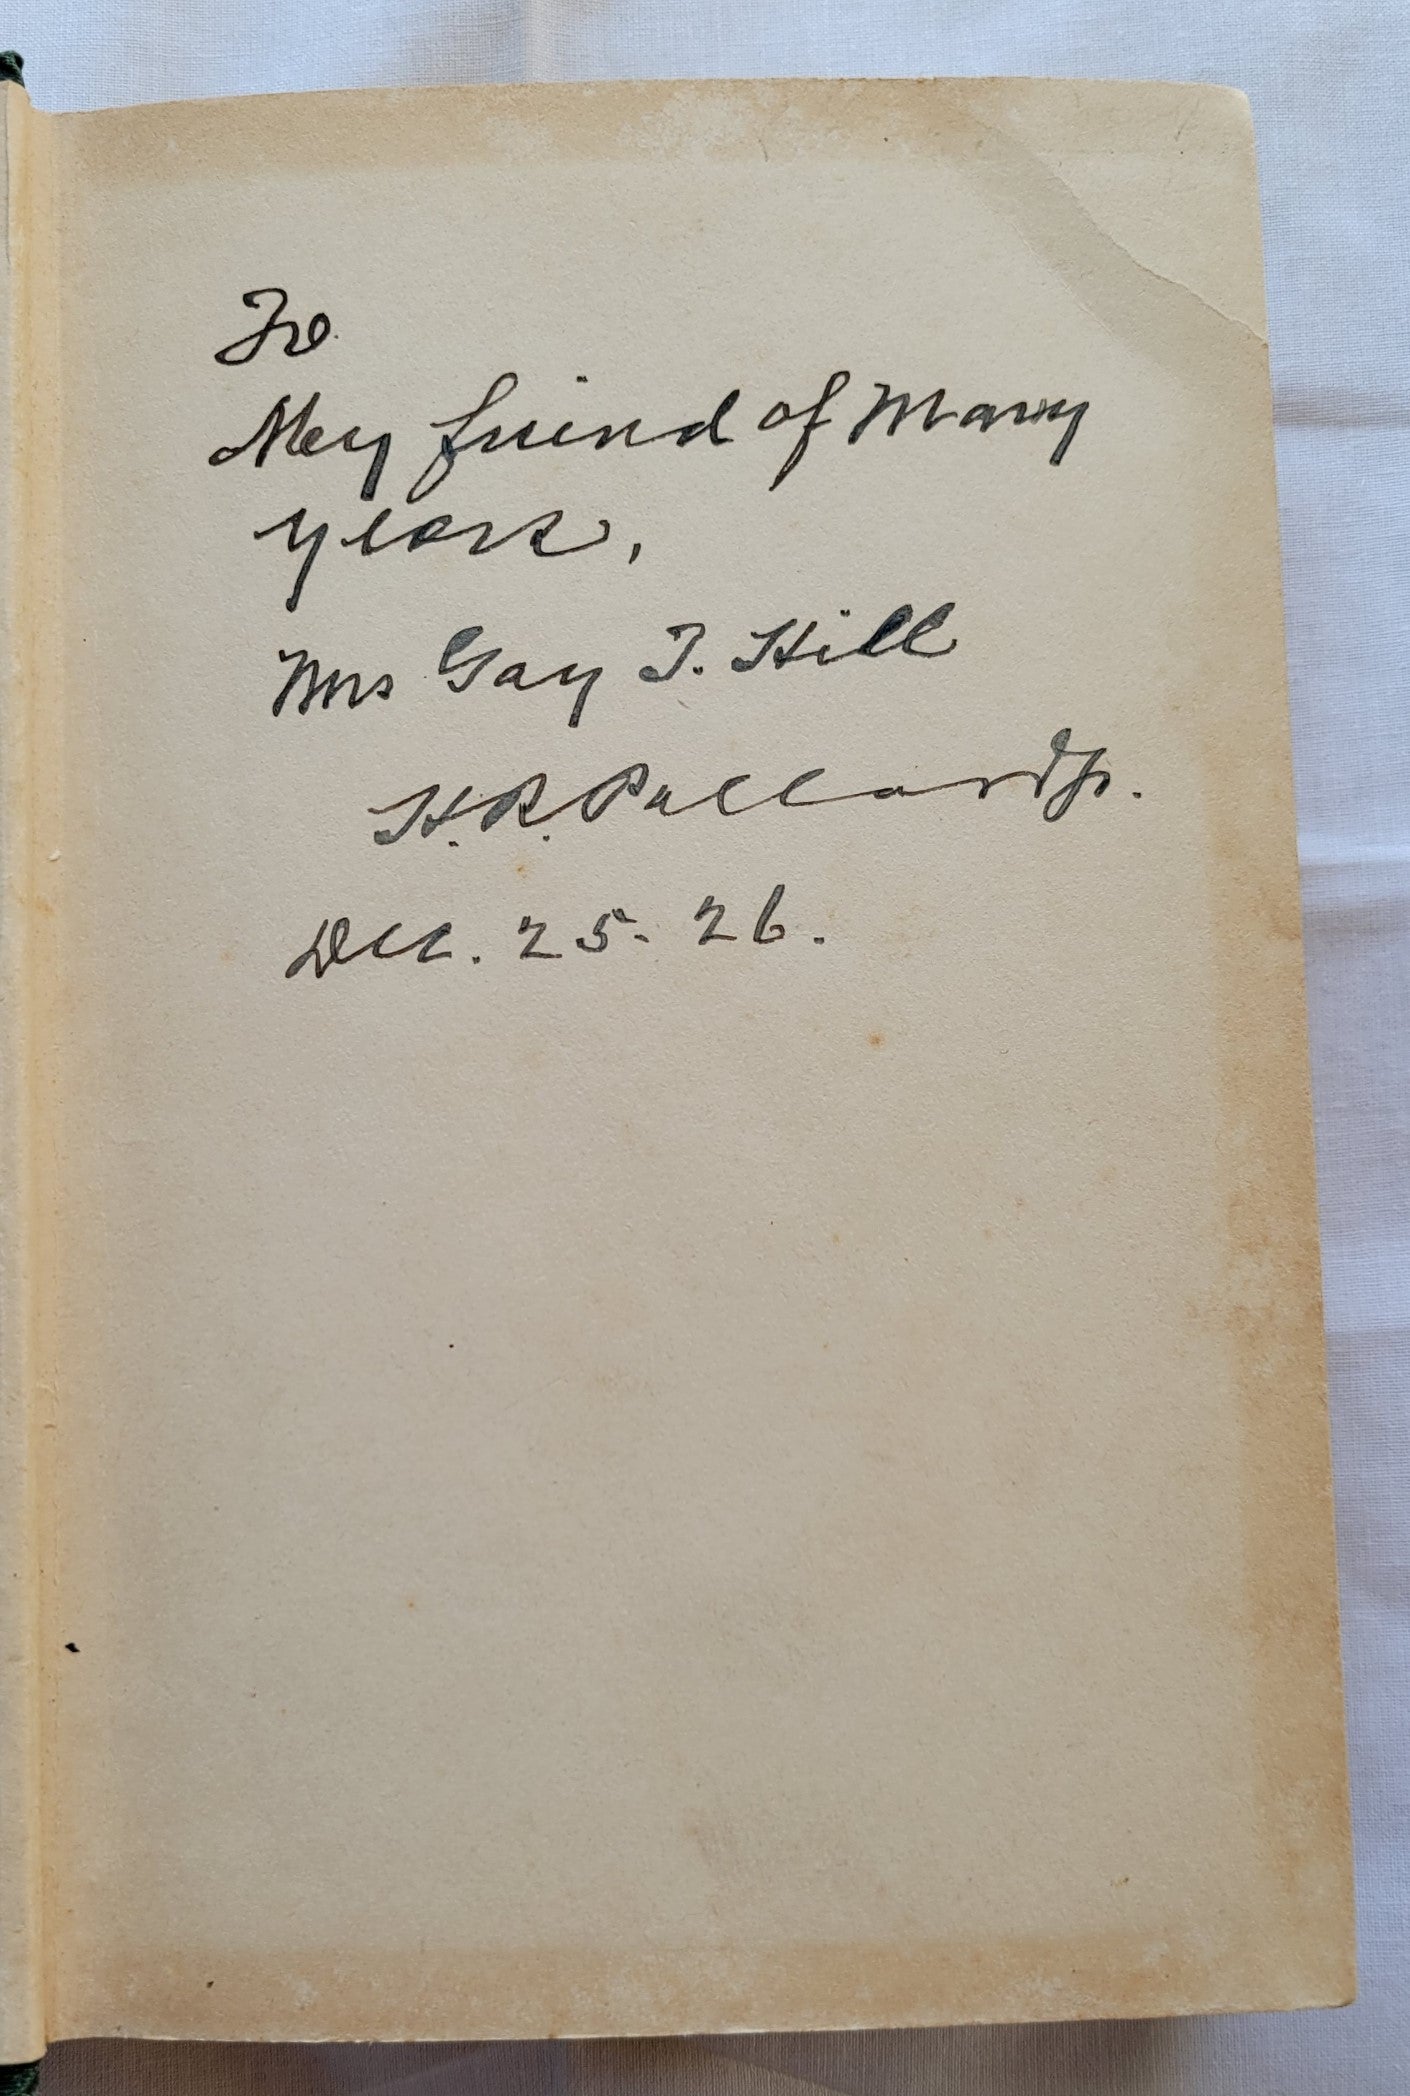 Vintage book for sale, "One Increasing Purpose" by A. S. M. Hutchinson, published by Little, Brown and Company, 1925.  View of page with handwriting.